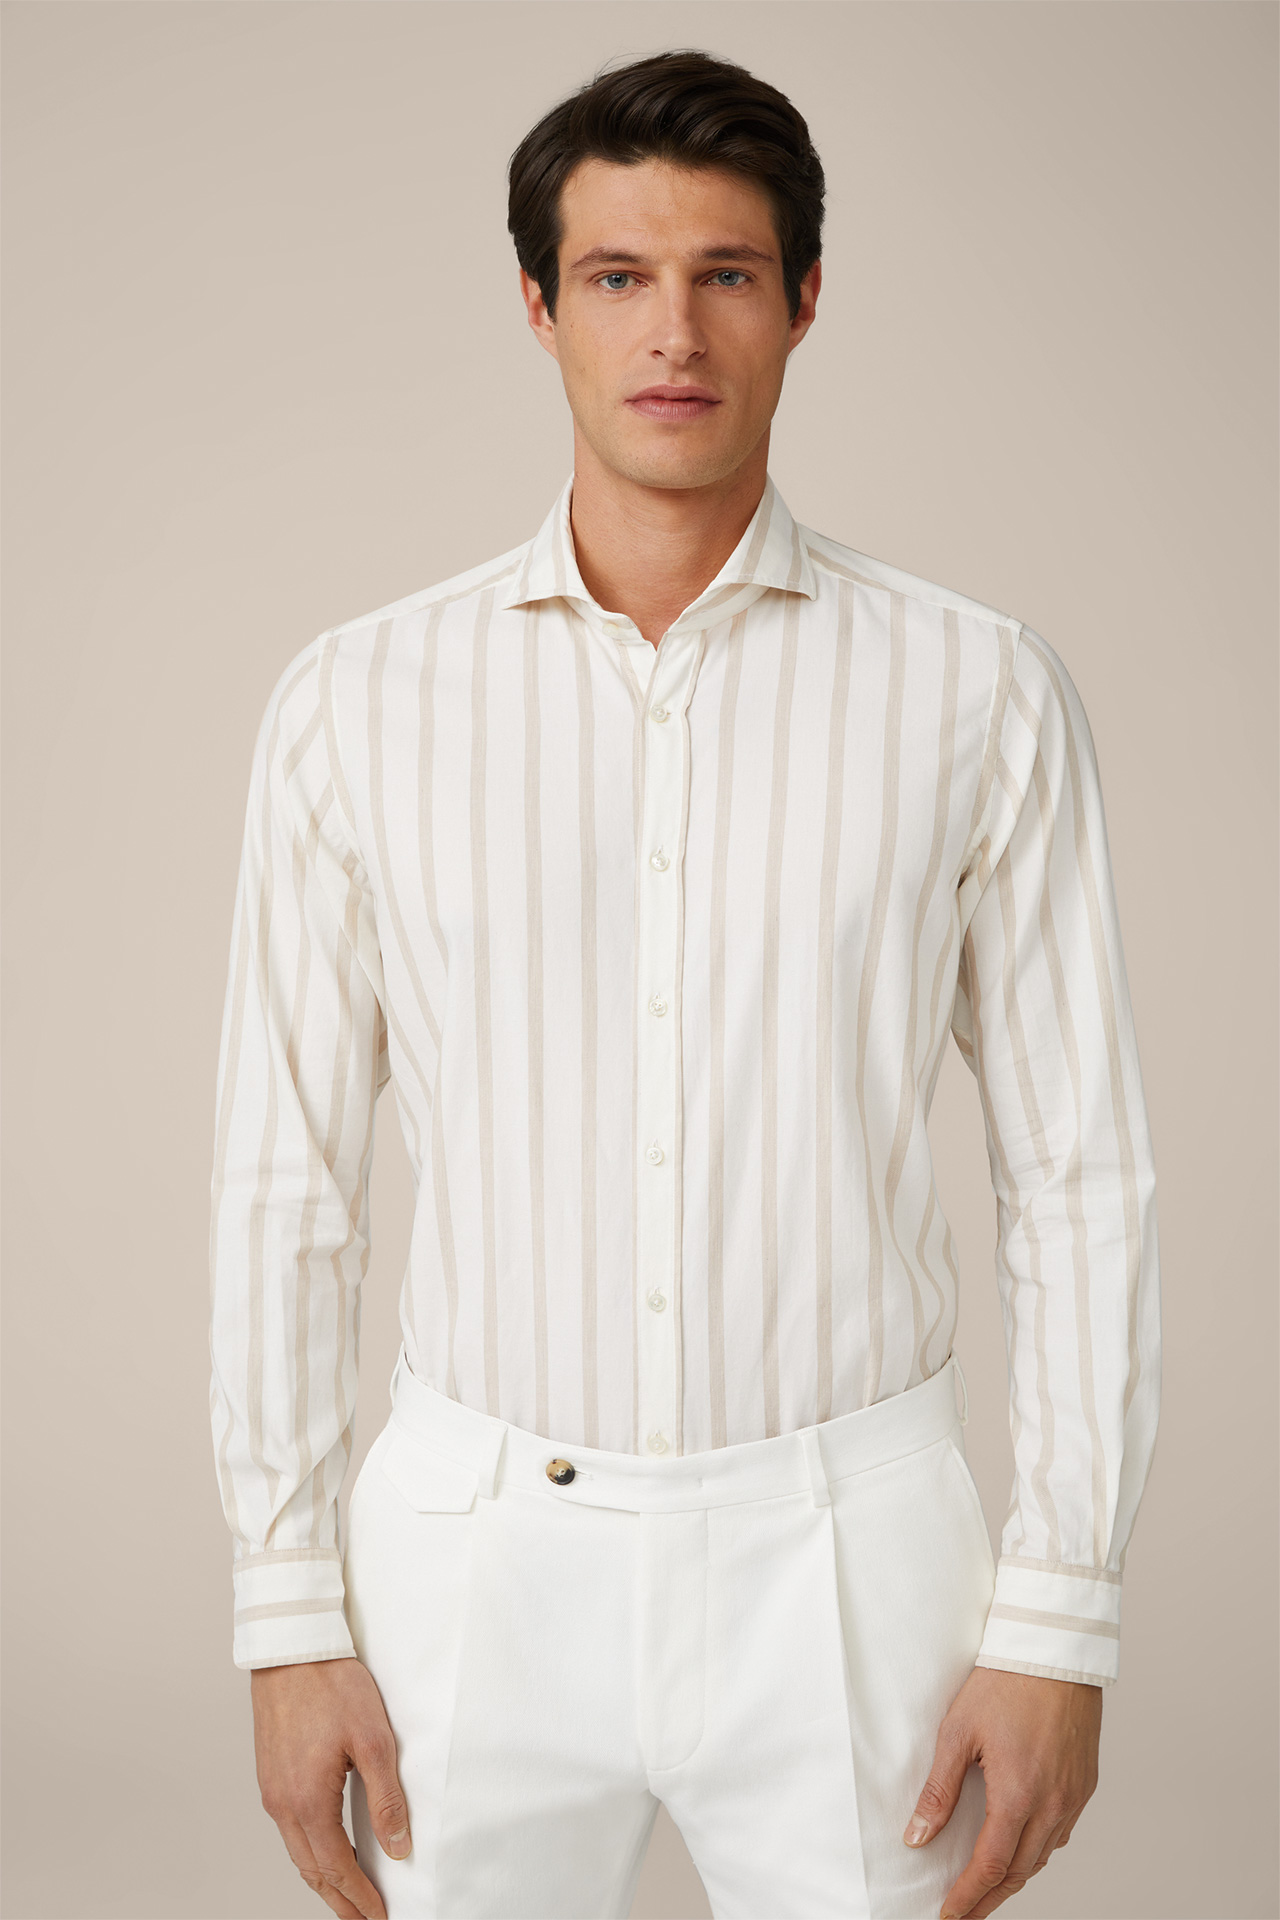 Lano Cotton Shirt in Cream and Brown Striped